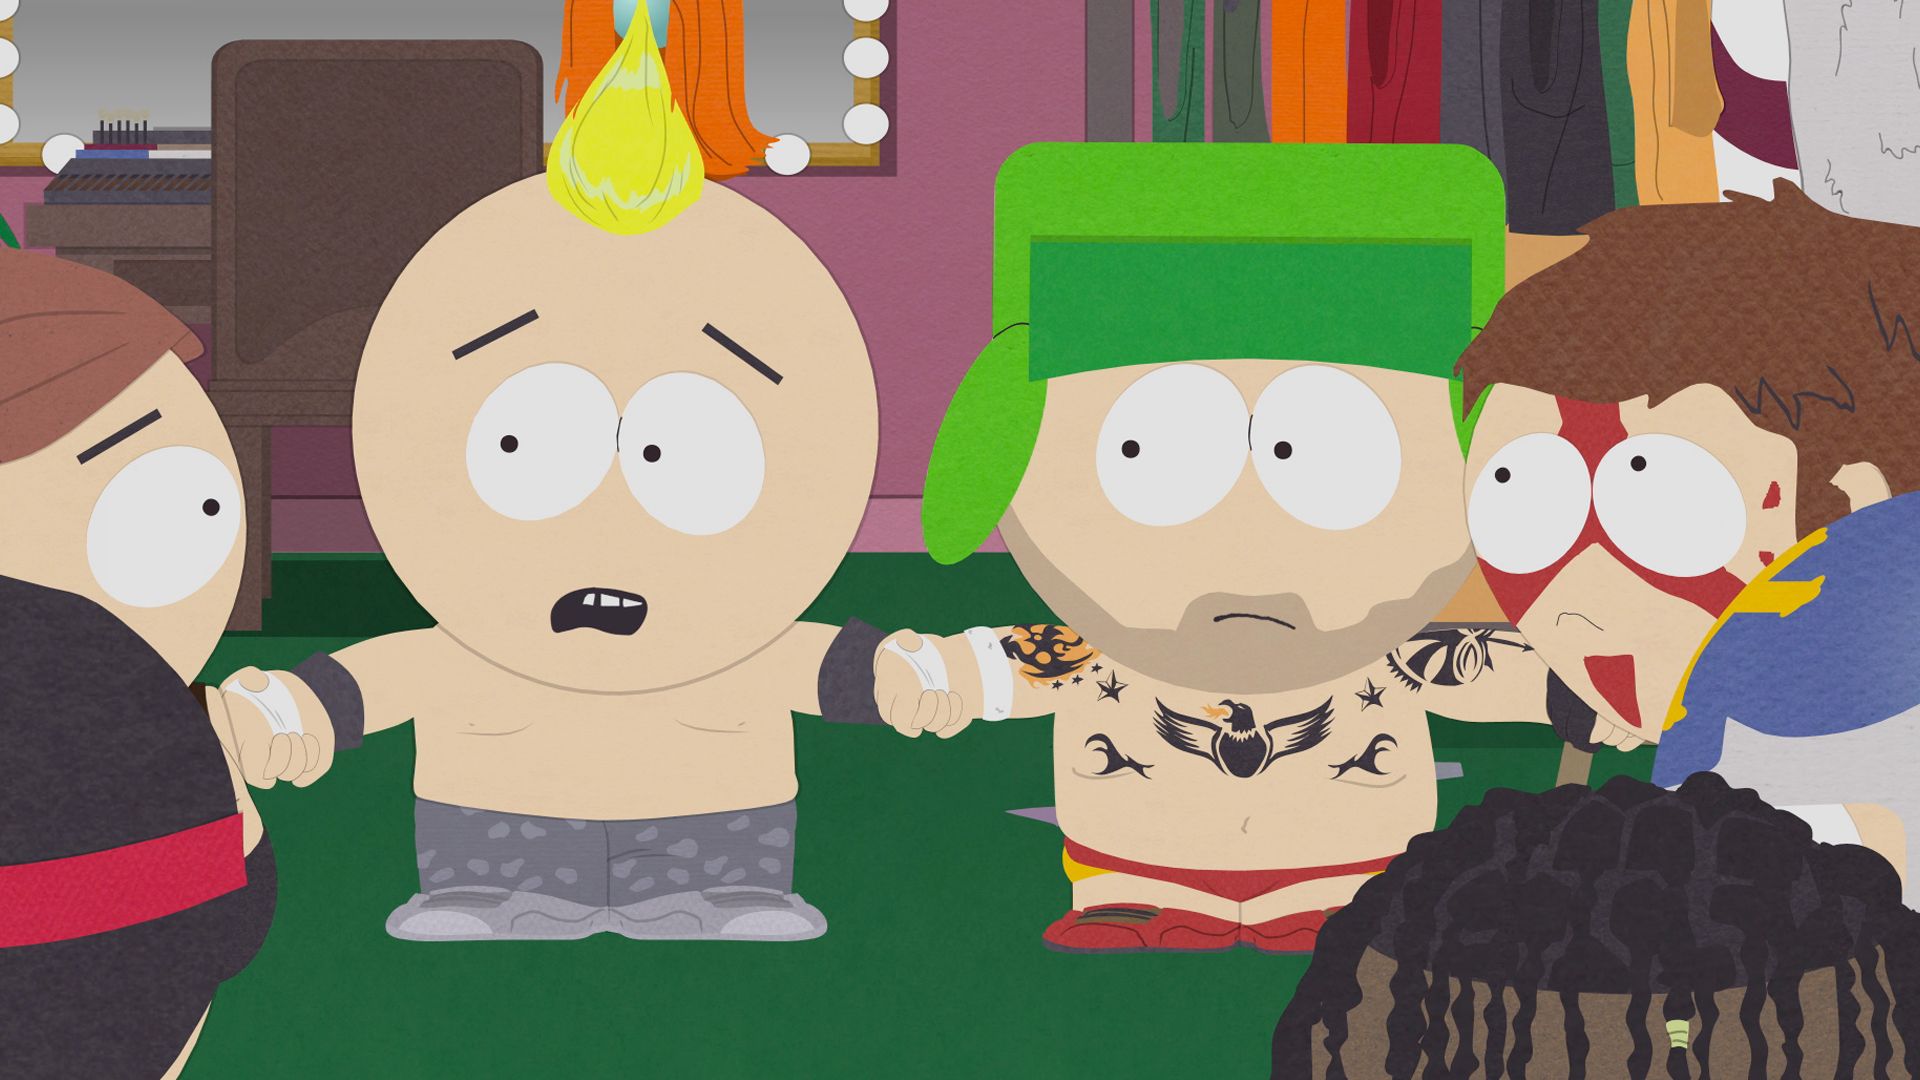 Stir with the Excitement of Violence - Season 13 Episode 10 - South Park